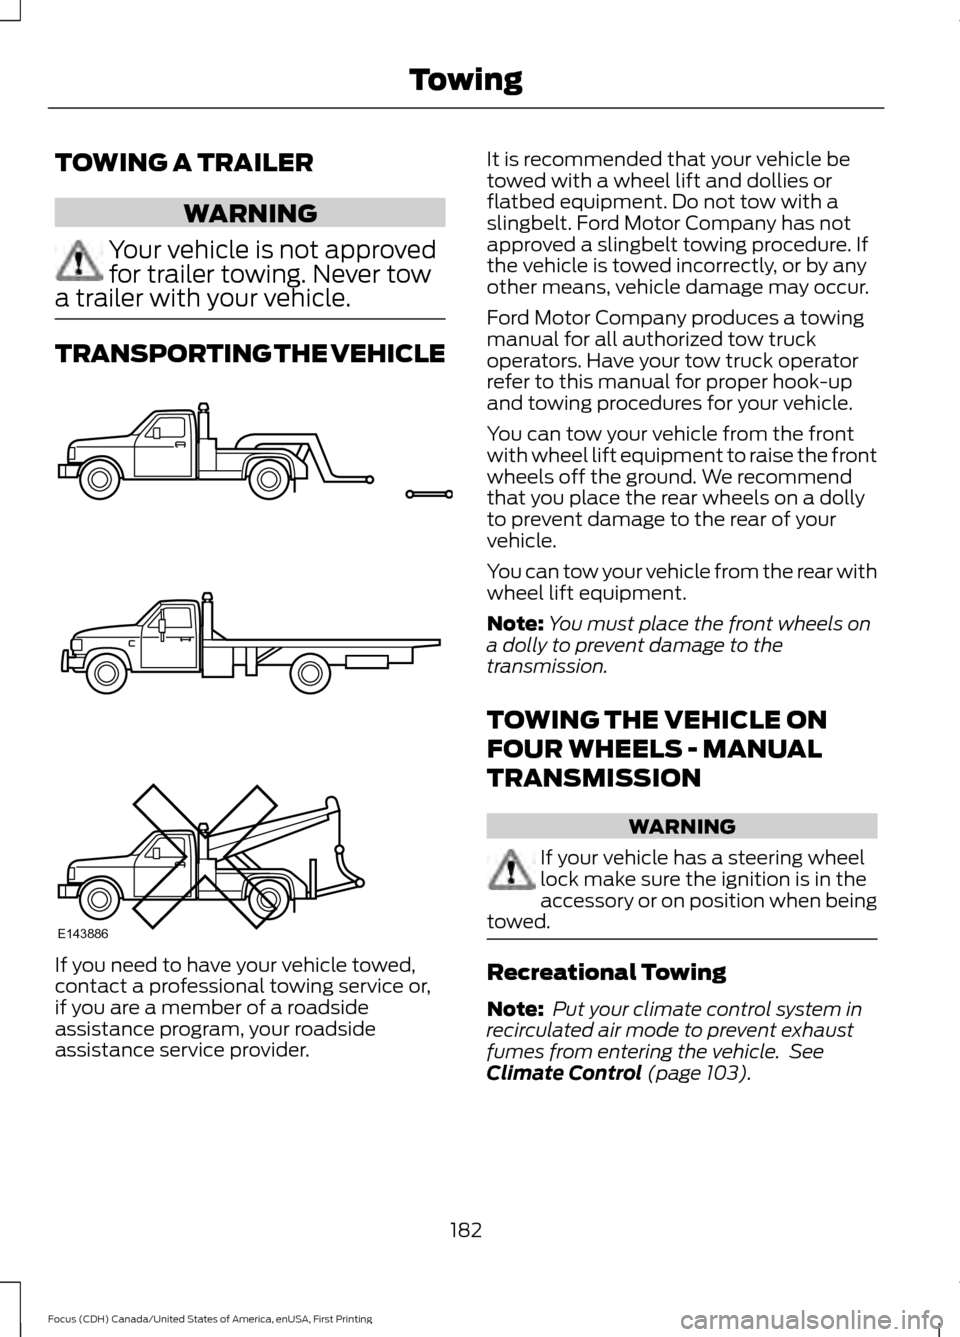 FORD FOCUS 2016 3.G User Guide TOWING A TRAILER
WARNING
Your vehicle is not approved
for trailer towing. Never tow
a trailer with your vehicle. TRANSPORTING THE VEHICLE
If you need to have your vehicle towed,
contact a professional